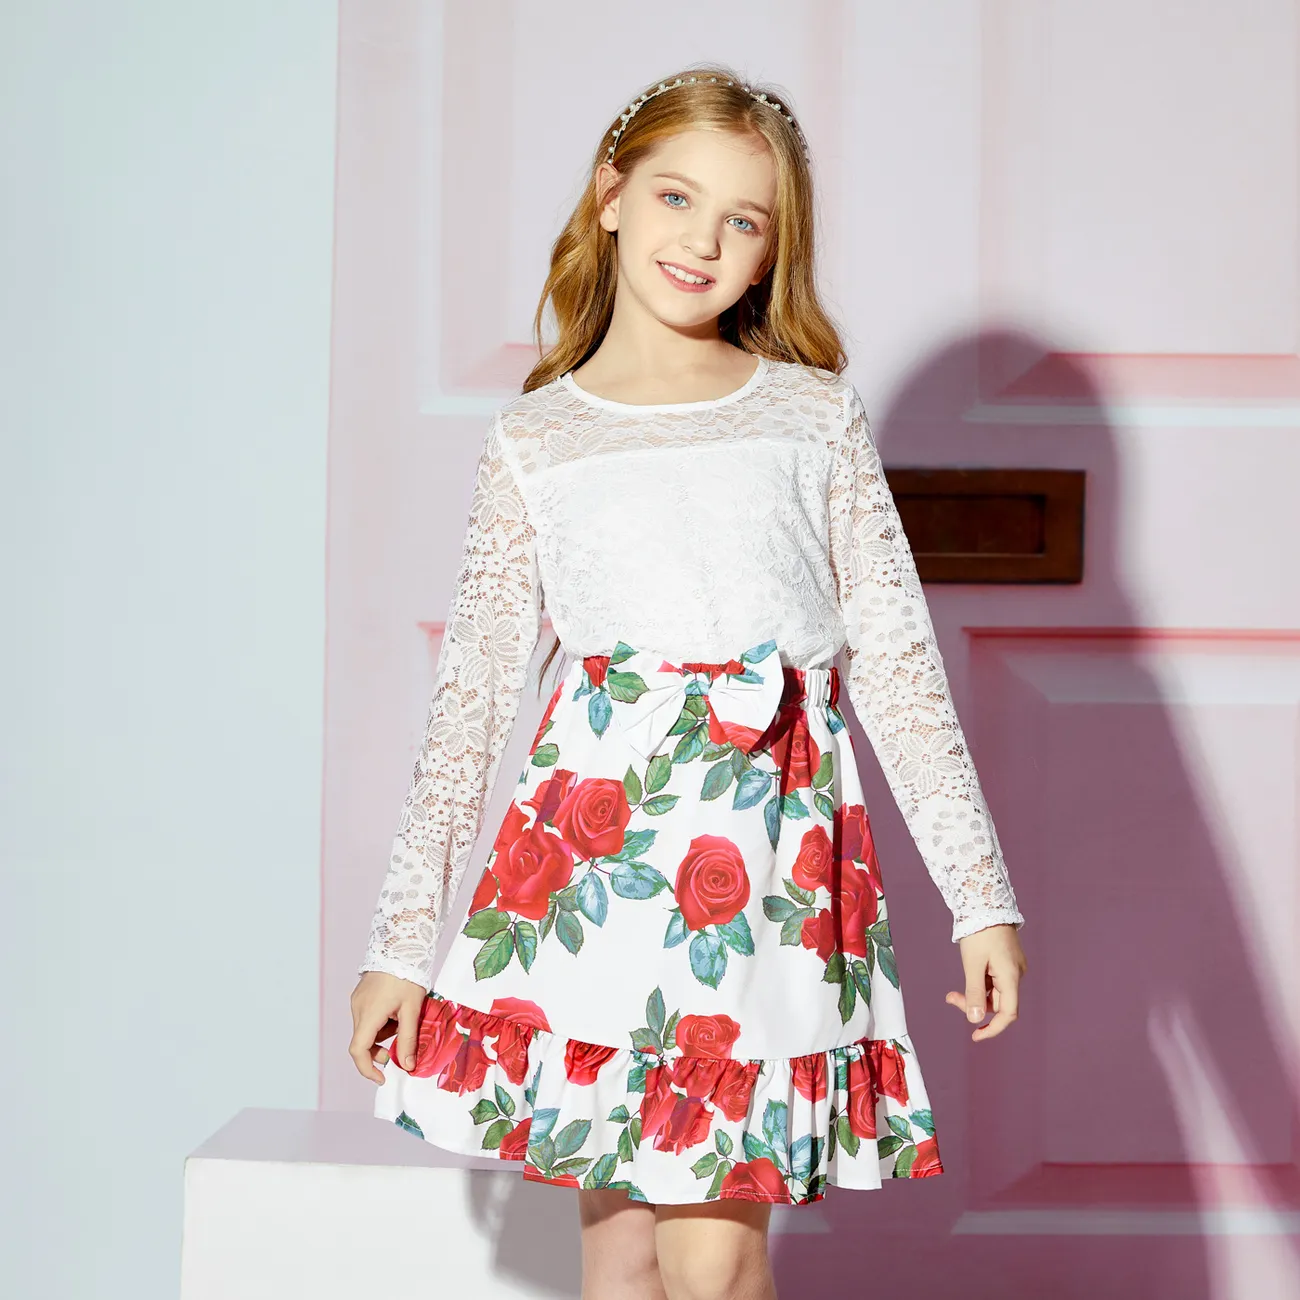 2-piece Kid Girl Lace Design Long-sleeve Tee and Bowknot Design Floral Print Skirt Set White big image 1